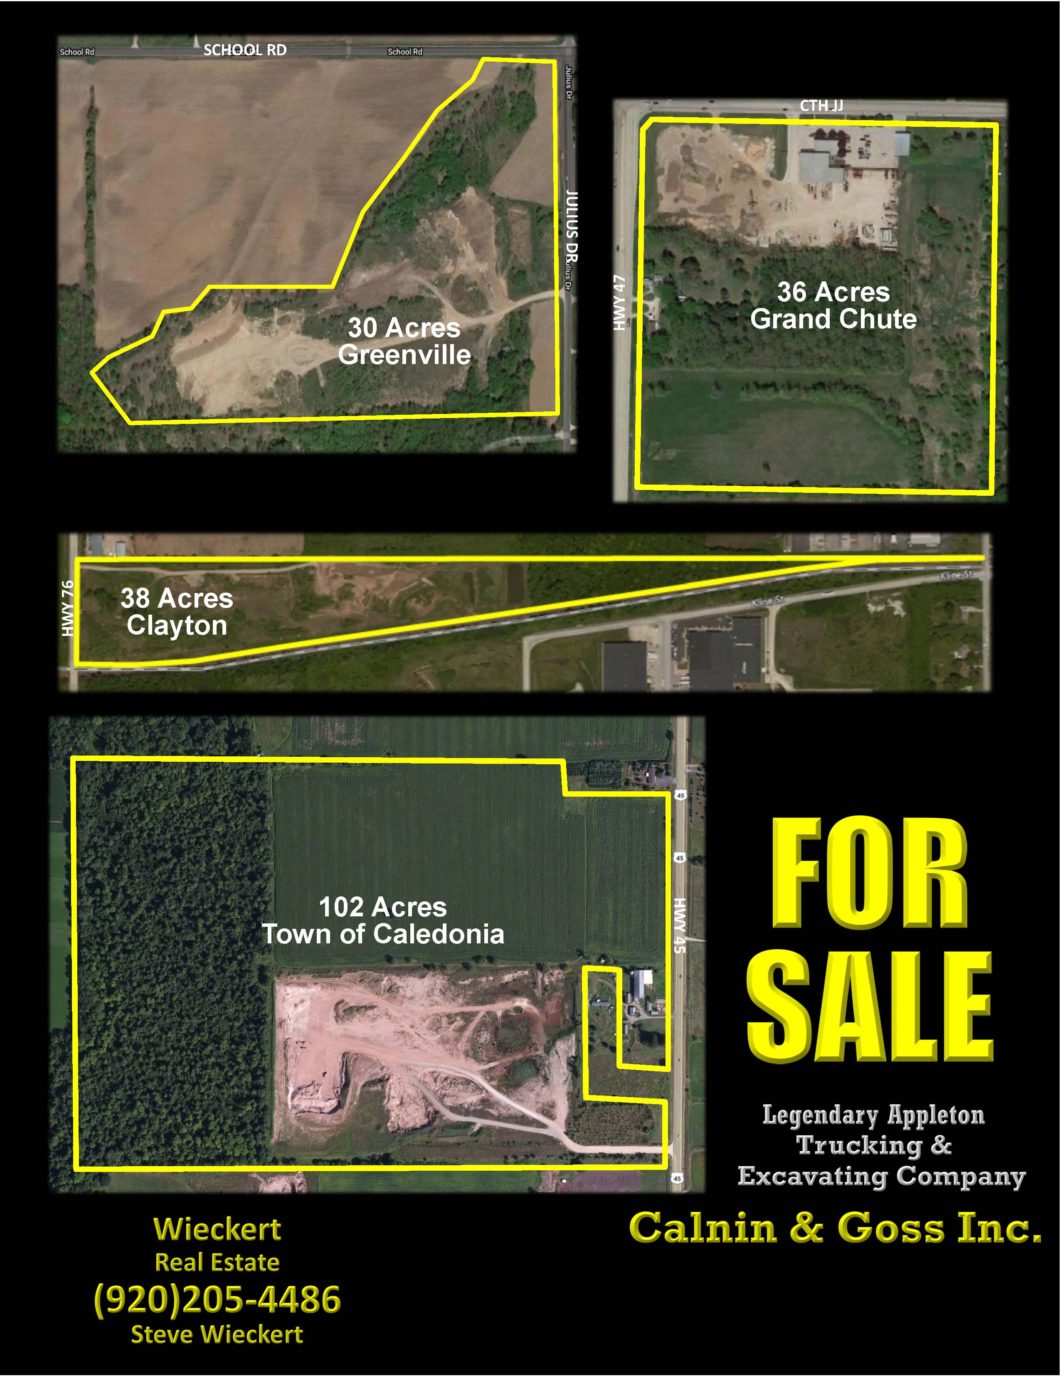 Wieckert Real Estate, Appleton Wisconsin, Fox Valley real estate, commercial land tracts for sale, acreage for sale, land for sale, vacant land for sale,land for sale near me, Farms for sale, outagamie county land for sale